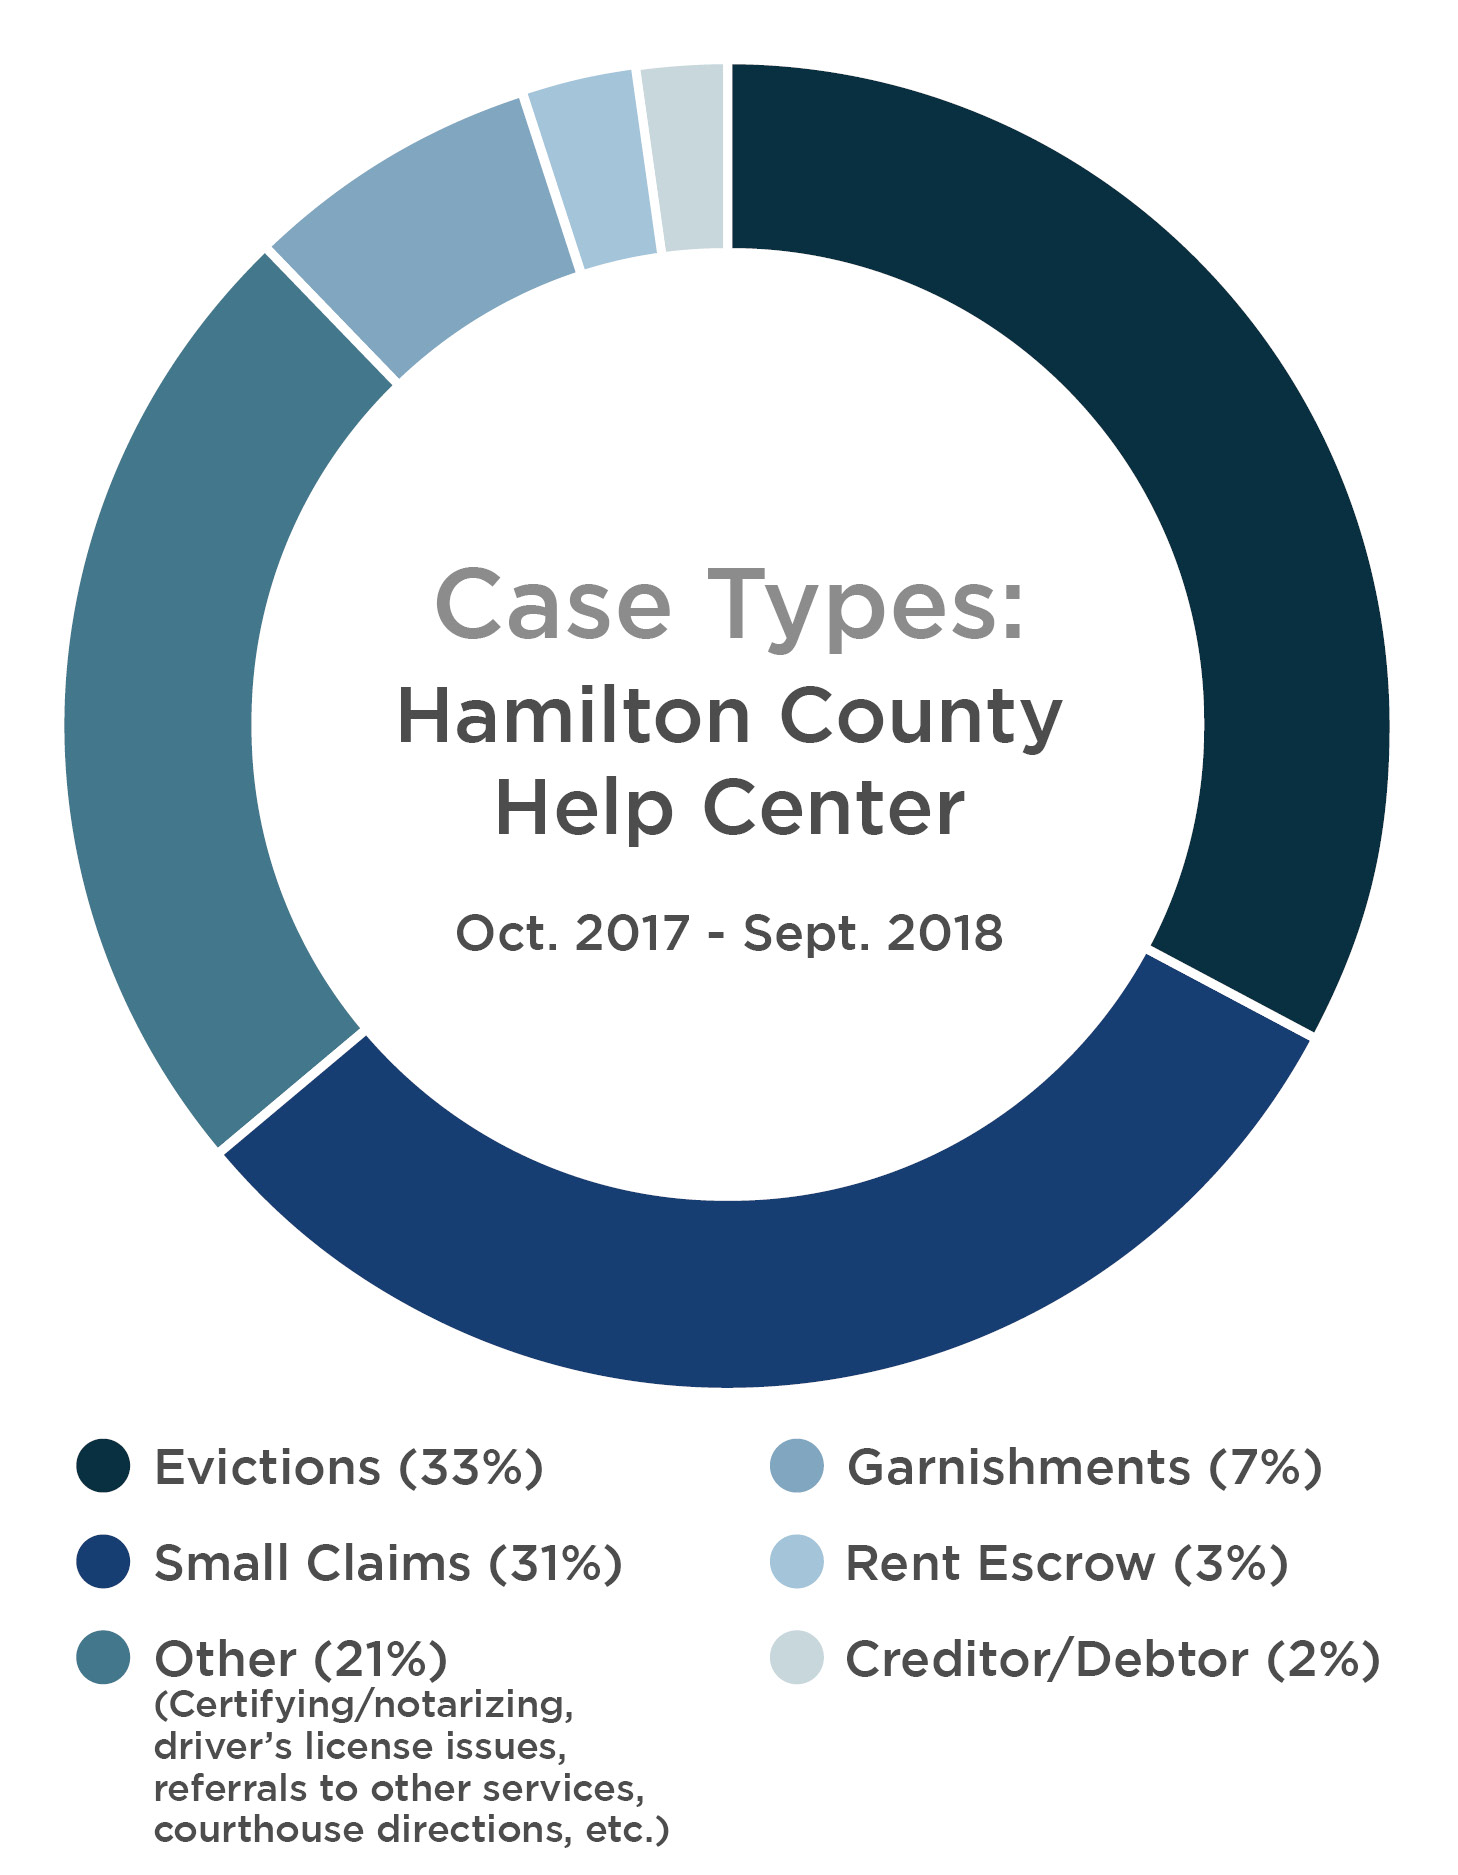 Image of a pie chart breaking down the case types from October 2017 to September 2018 at the Hamilton County Help Center